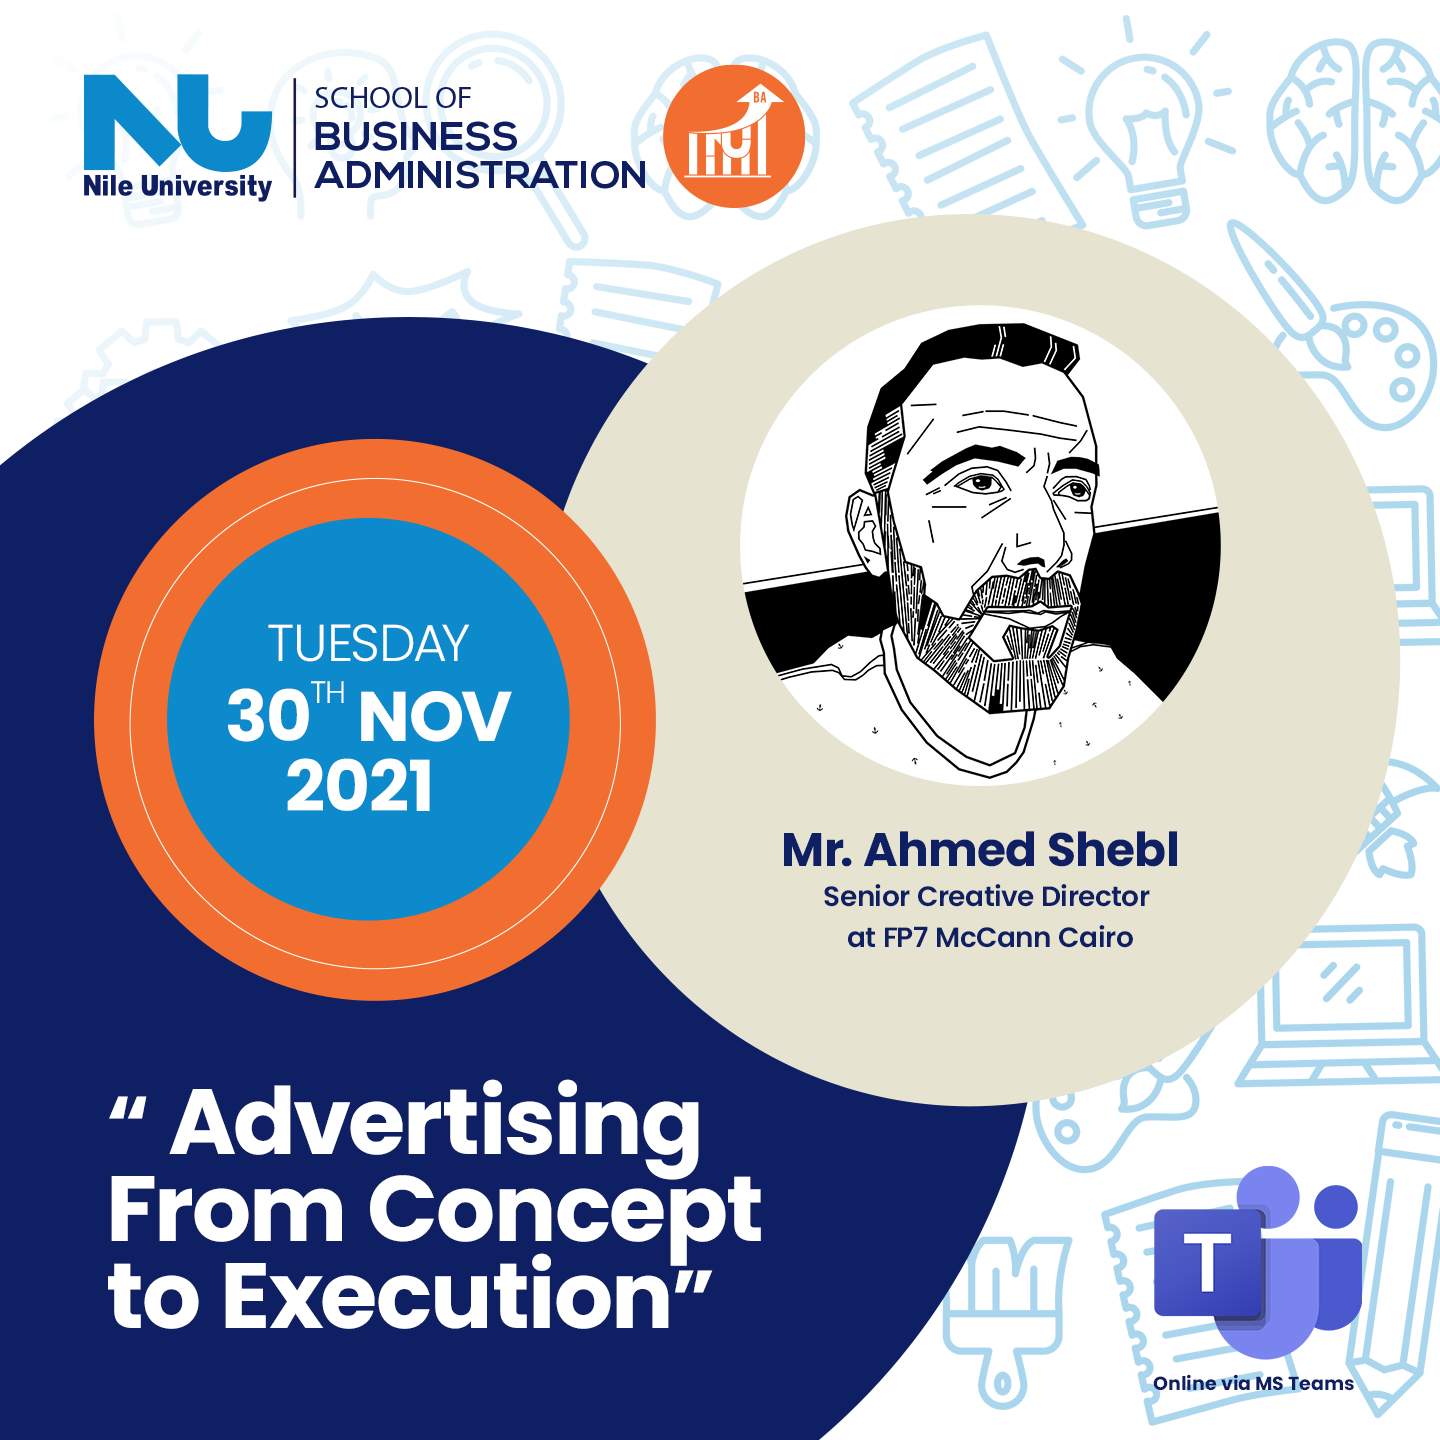 Advertising from Concept to Execution by Mr. Ahmed Shebl